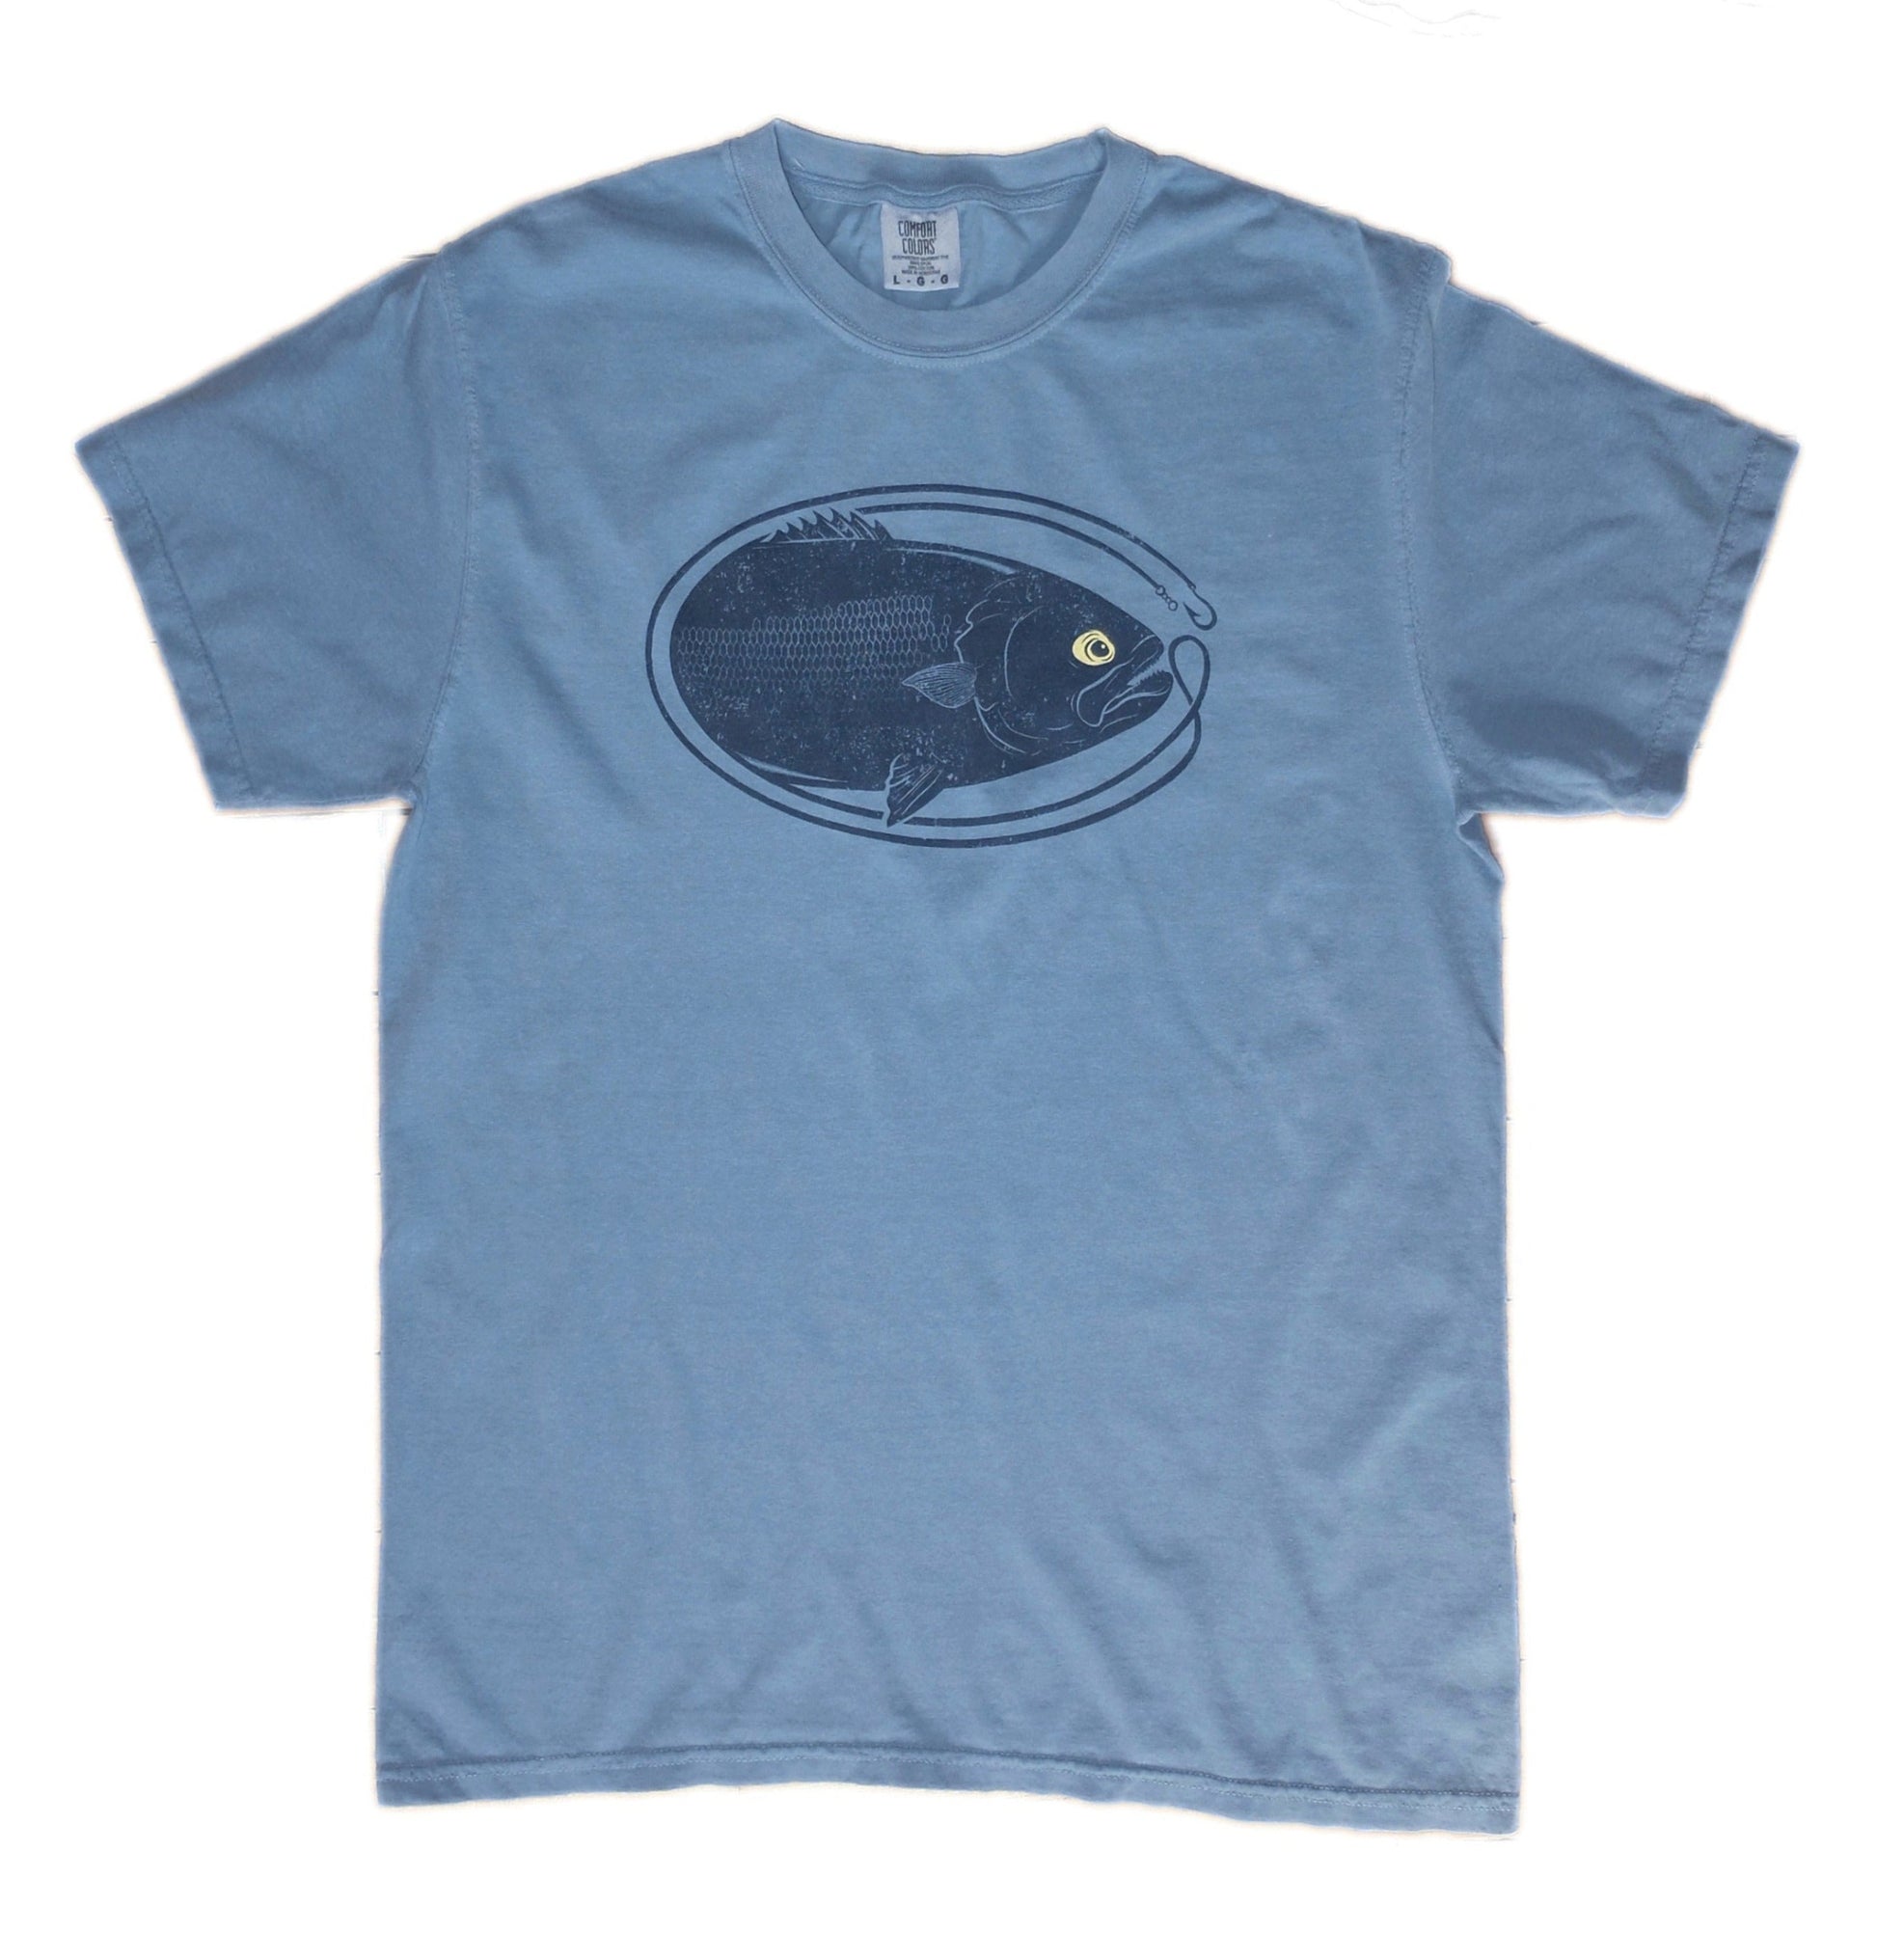 washed garment dye navy blue t-shirt with dark blue oval-shaped bluefish fishing graphic with yellow eyeball